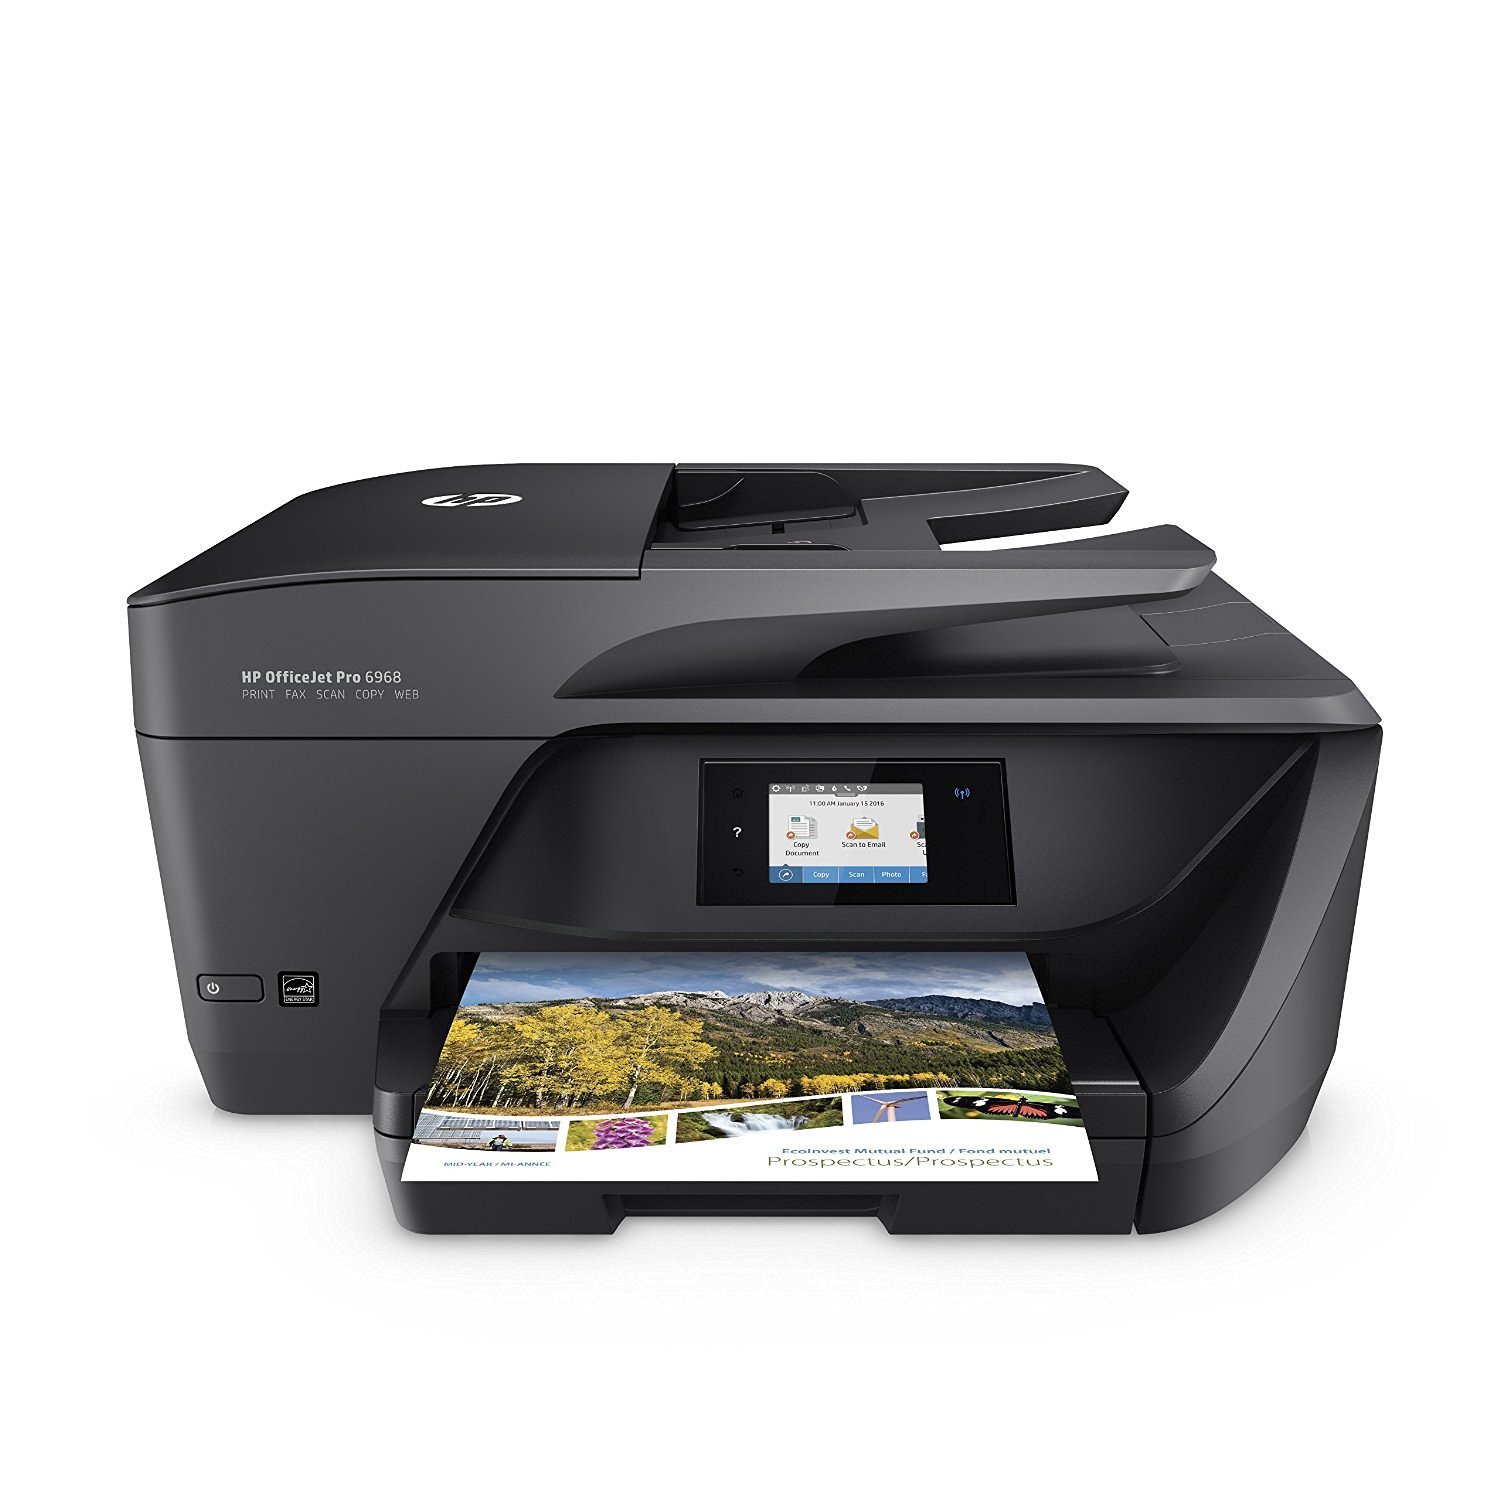 Hewlett Packard OfficeJet Pro 6968 Wireless All-in-One Photo Printer with Mobile Printing, Instant Ink ready (T0F28A)